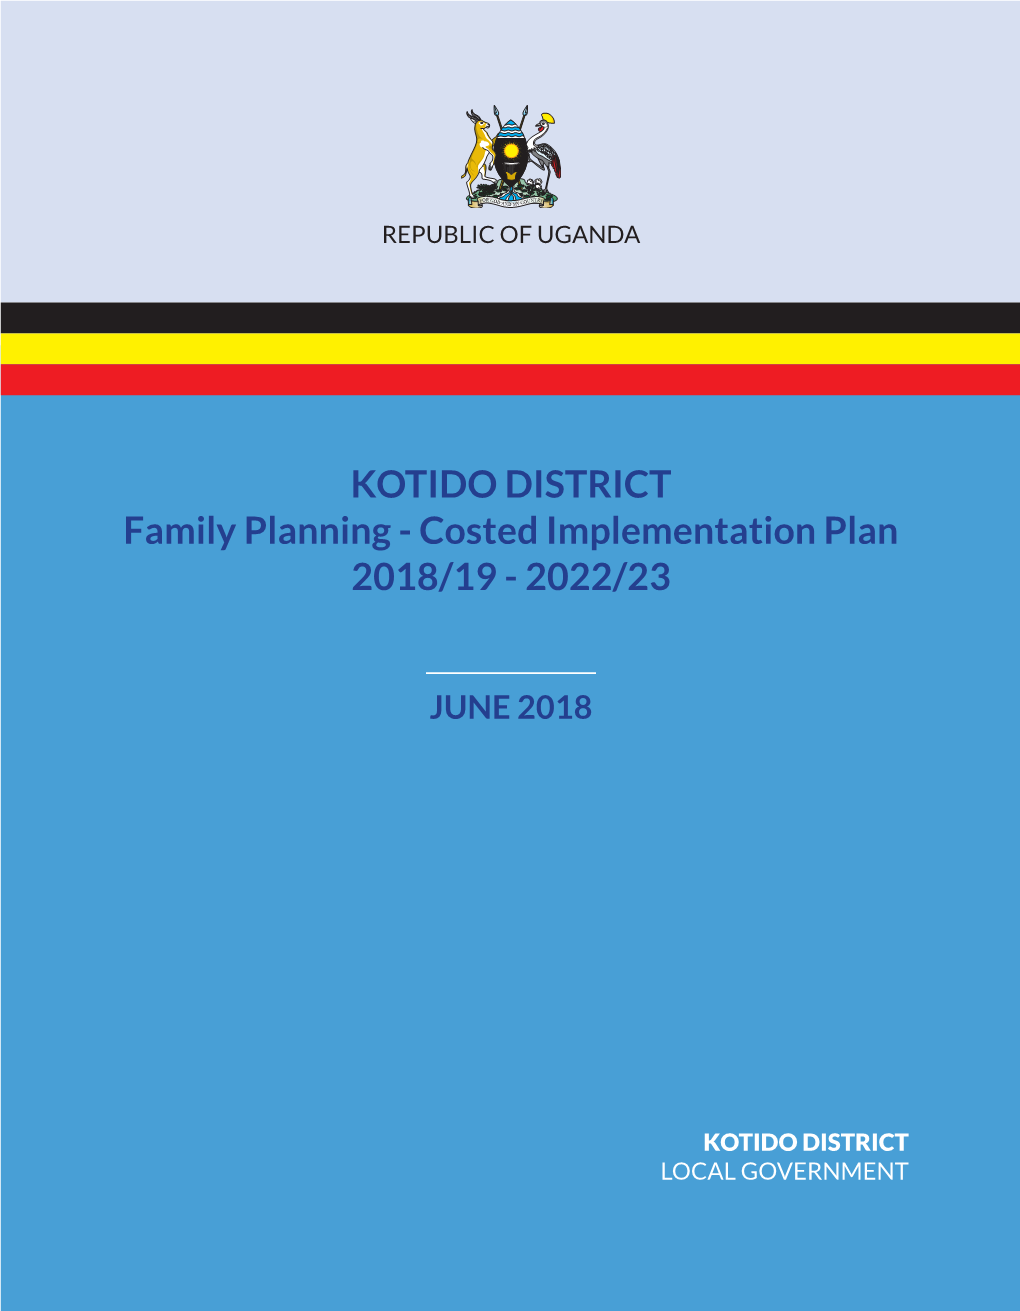 KOTIDO DISTRICT Family Planning - Costed Implementation Plan 2018/19 - 2022/23